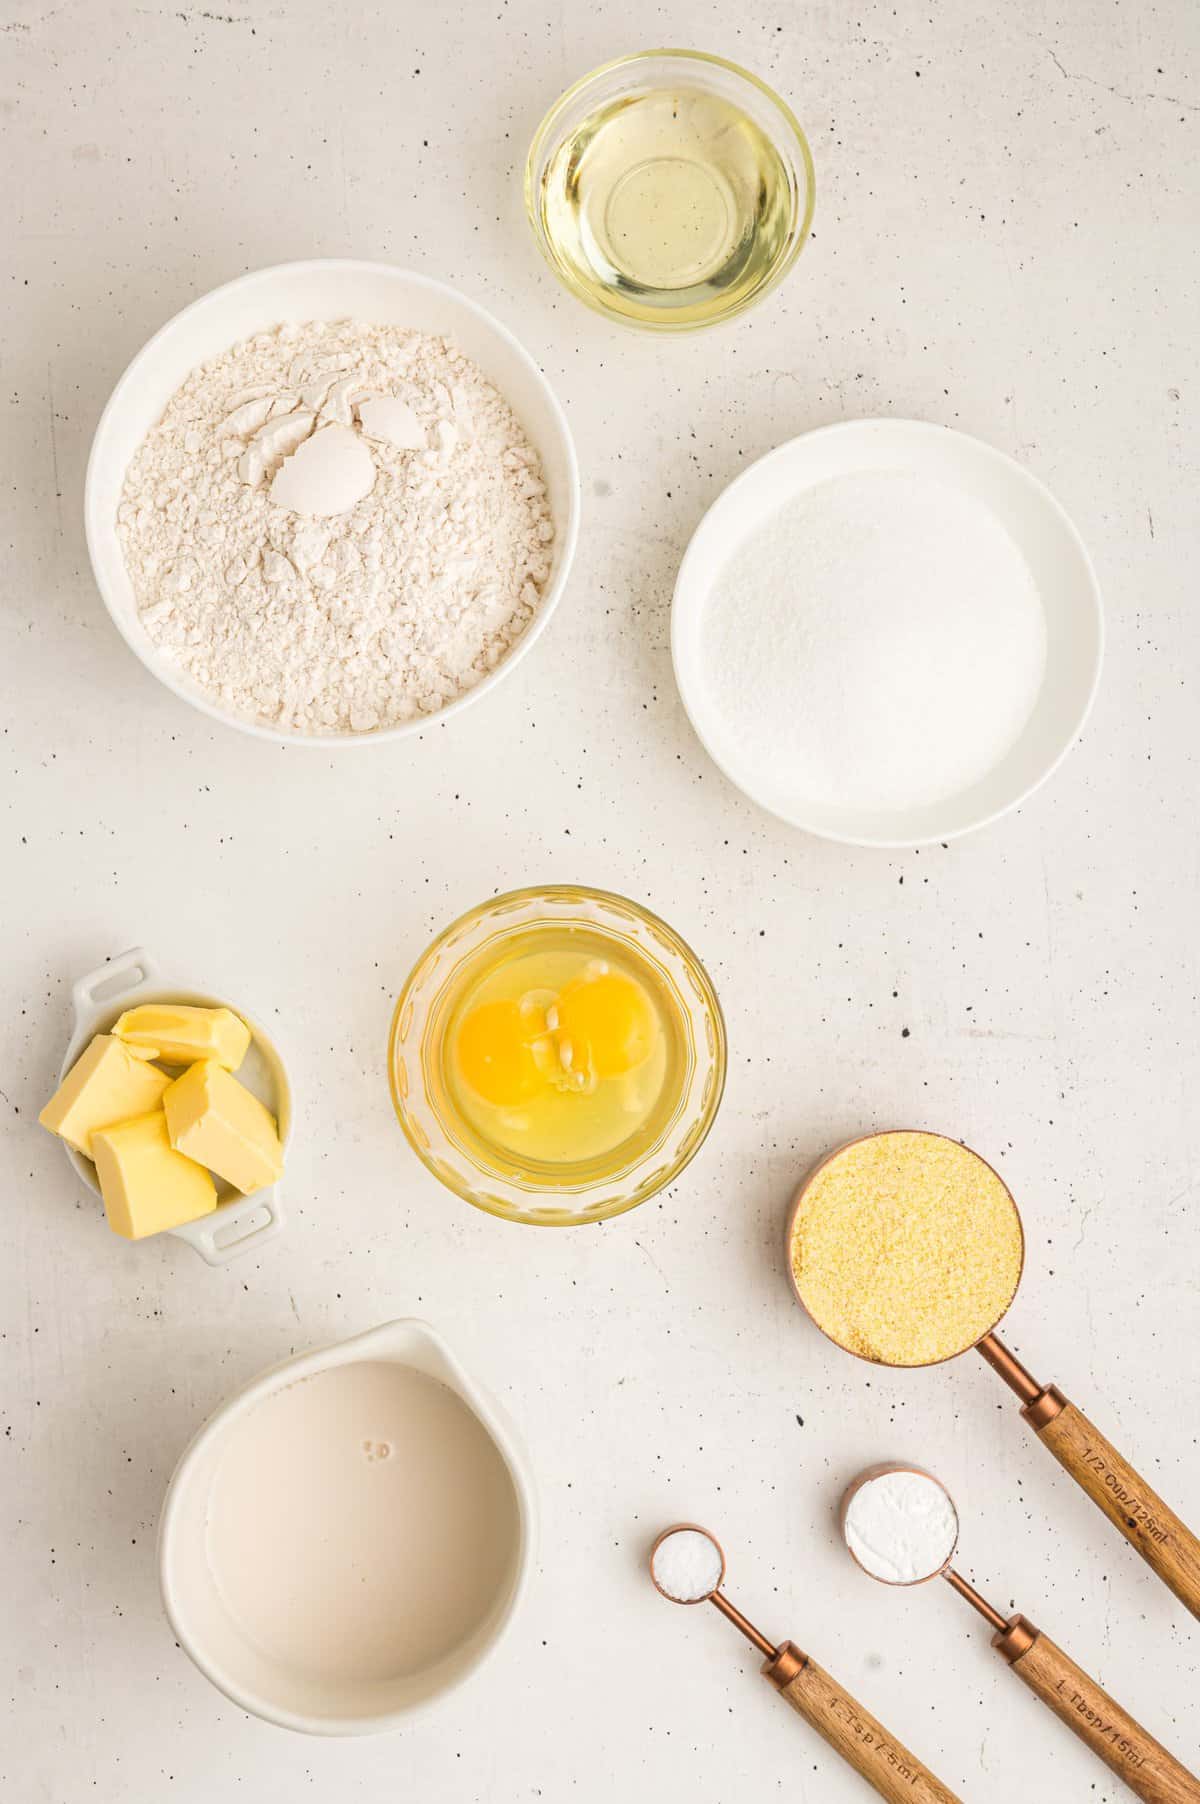 Ingredients to make the cornbread in small white bowls.